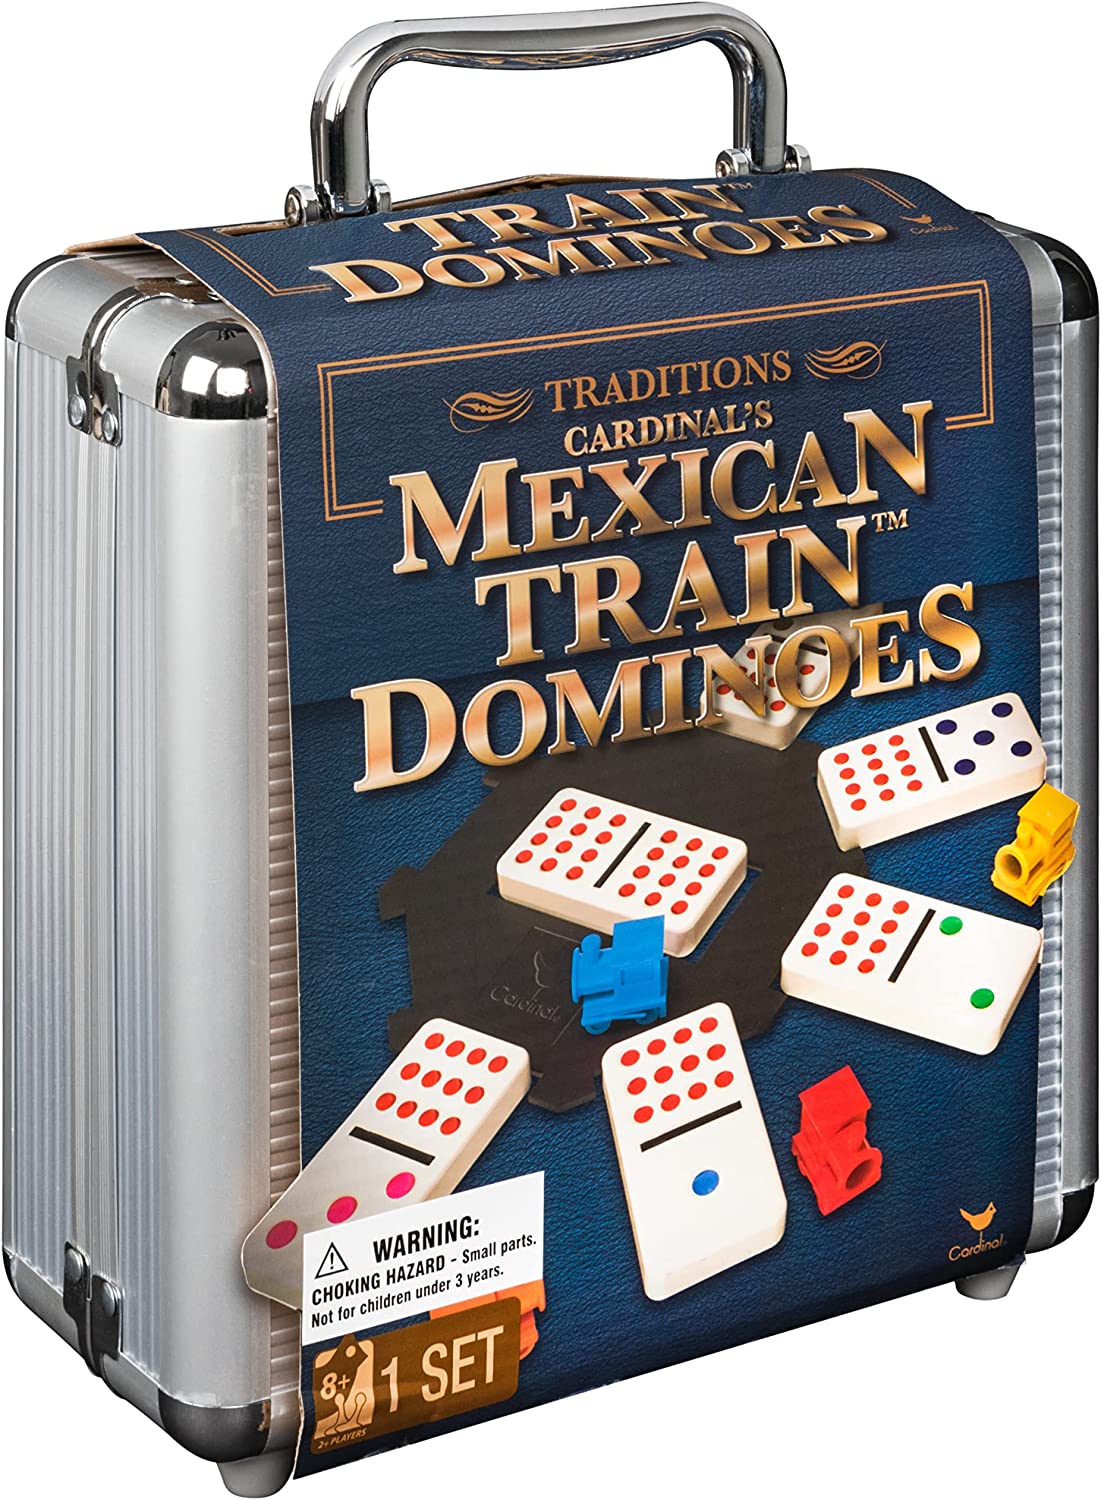 Train Dominoes Set Tile Board Game in Aluminum Carry Case - for 2-8 players, ages 8 and up